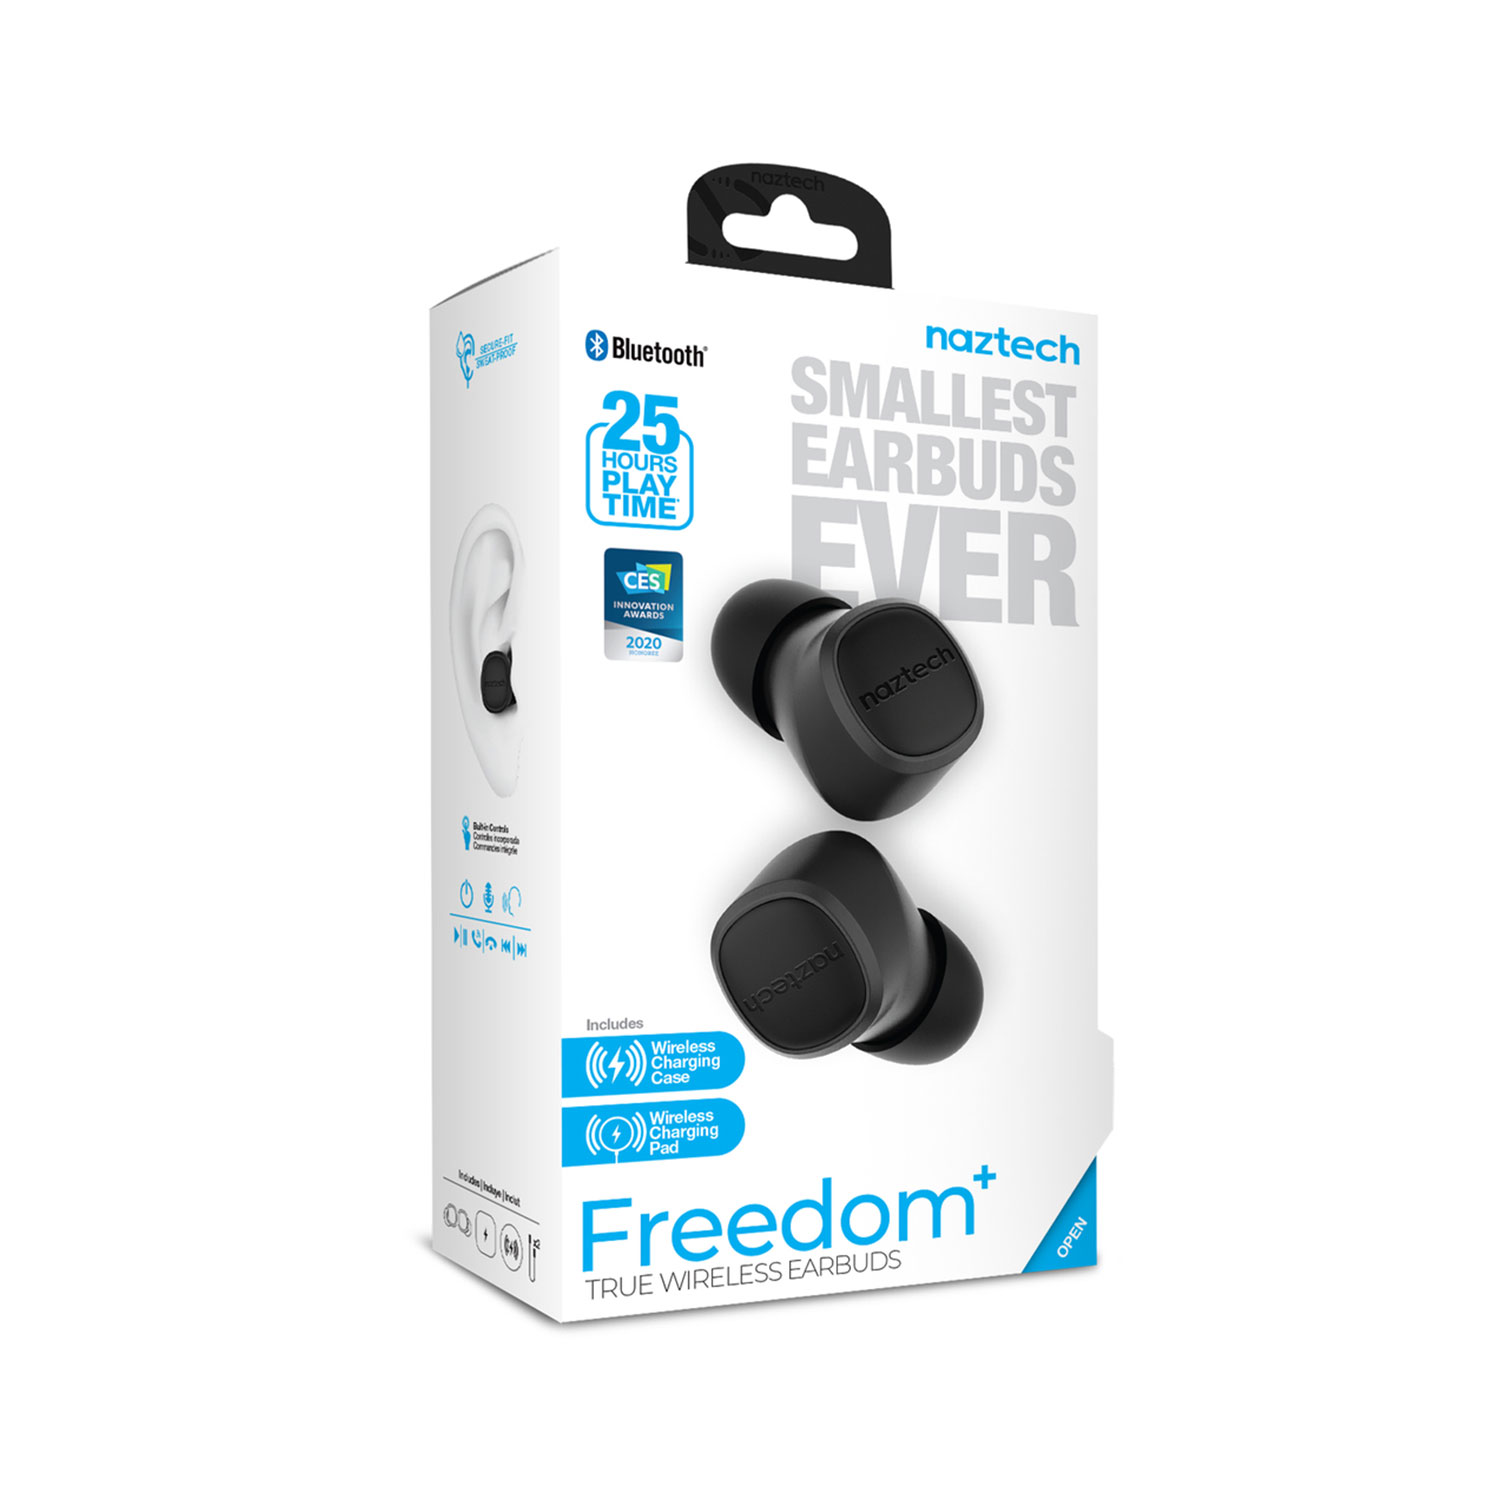 Naztech Freedom+ True Wireless Earbuds With Wireless Charging Case & Pad